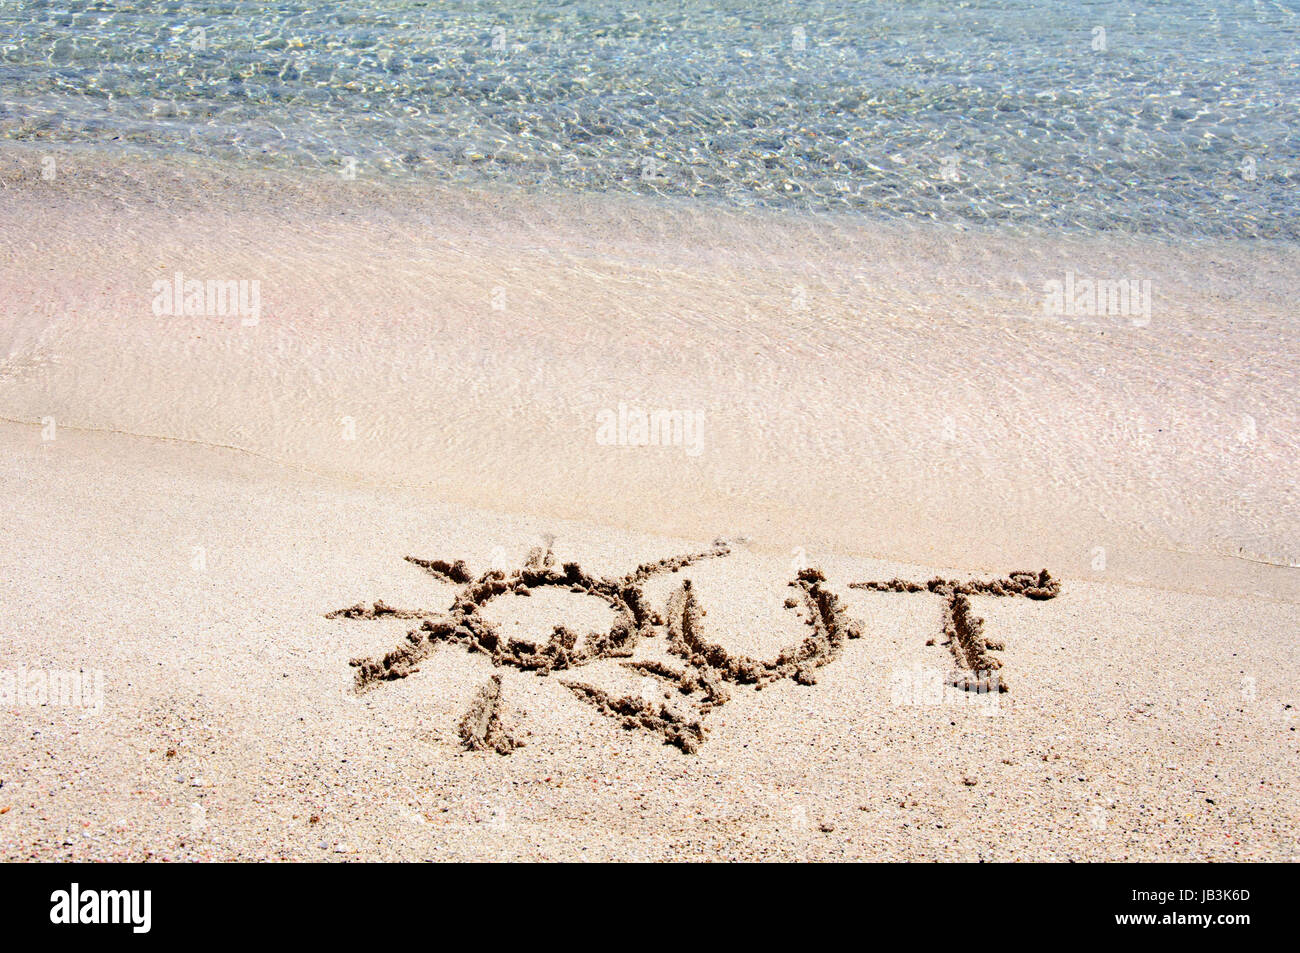 Word "OUT" written on sand on a beautiful beach, blue waves in background Stock Photo